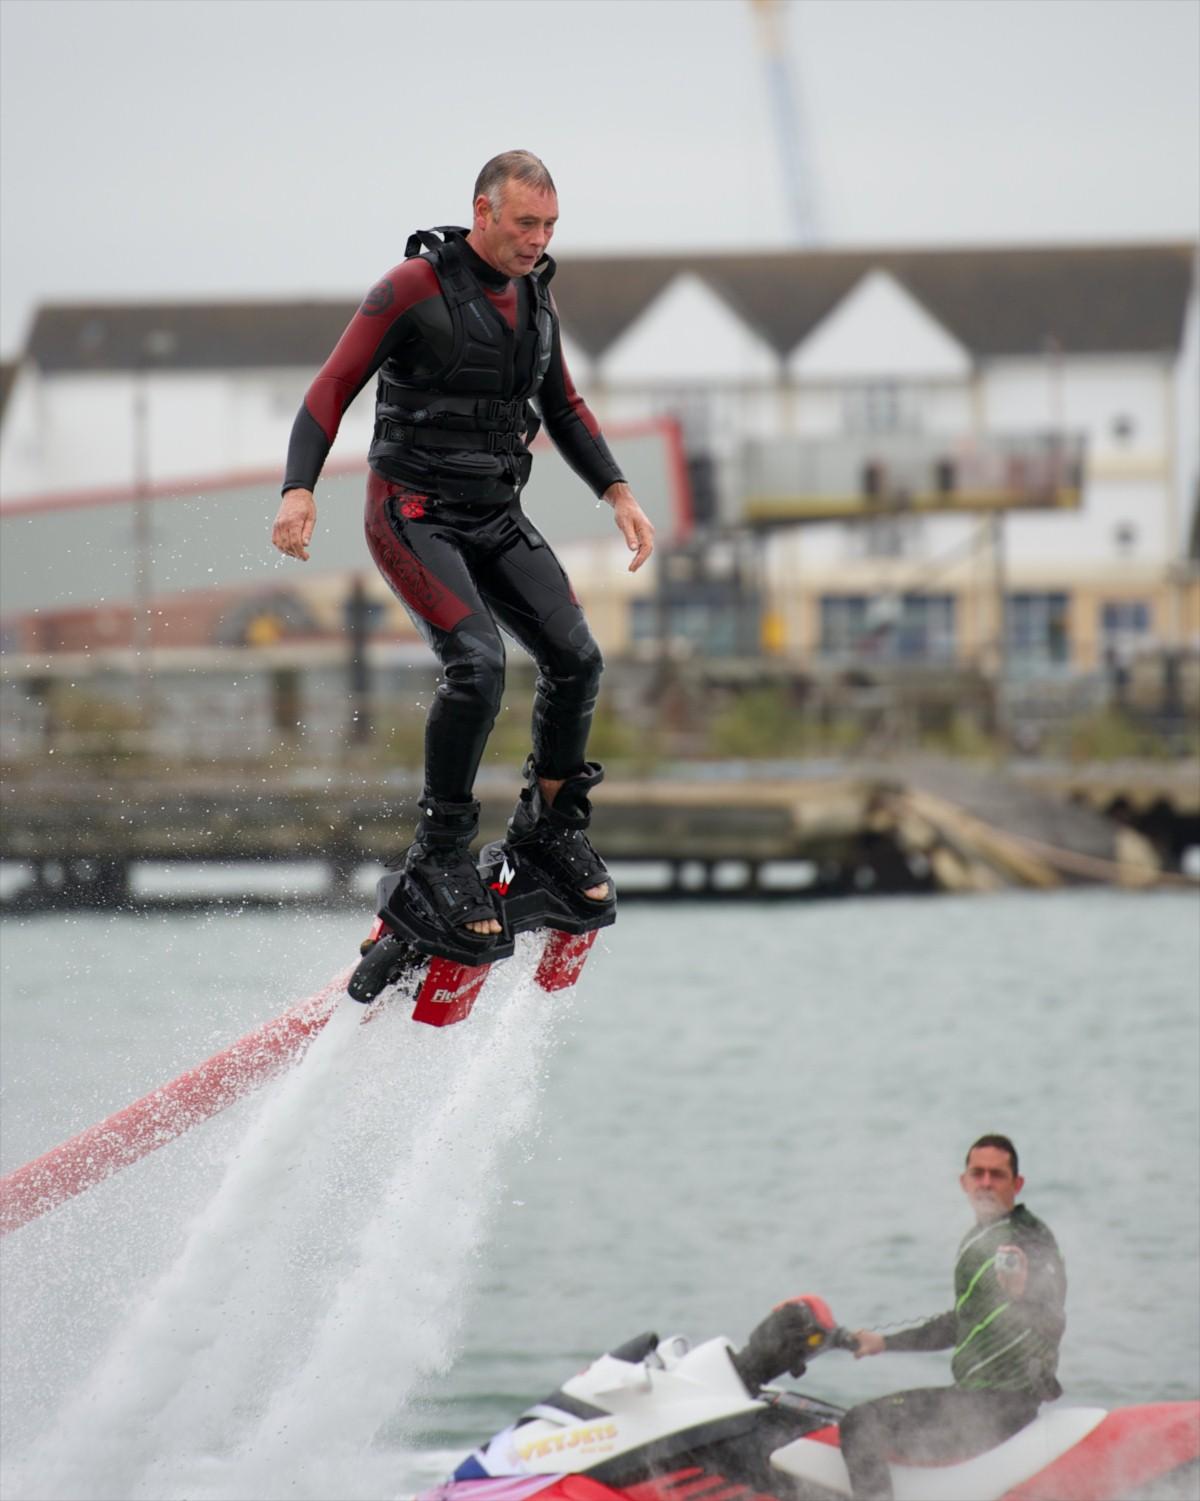 The Year in Pictures - 2013 - There was a live flyboarding demonstration during the PSP Southampton Boat Show. September 24, 2013.